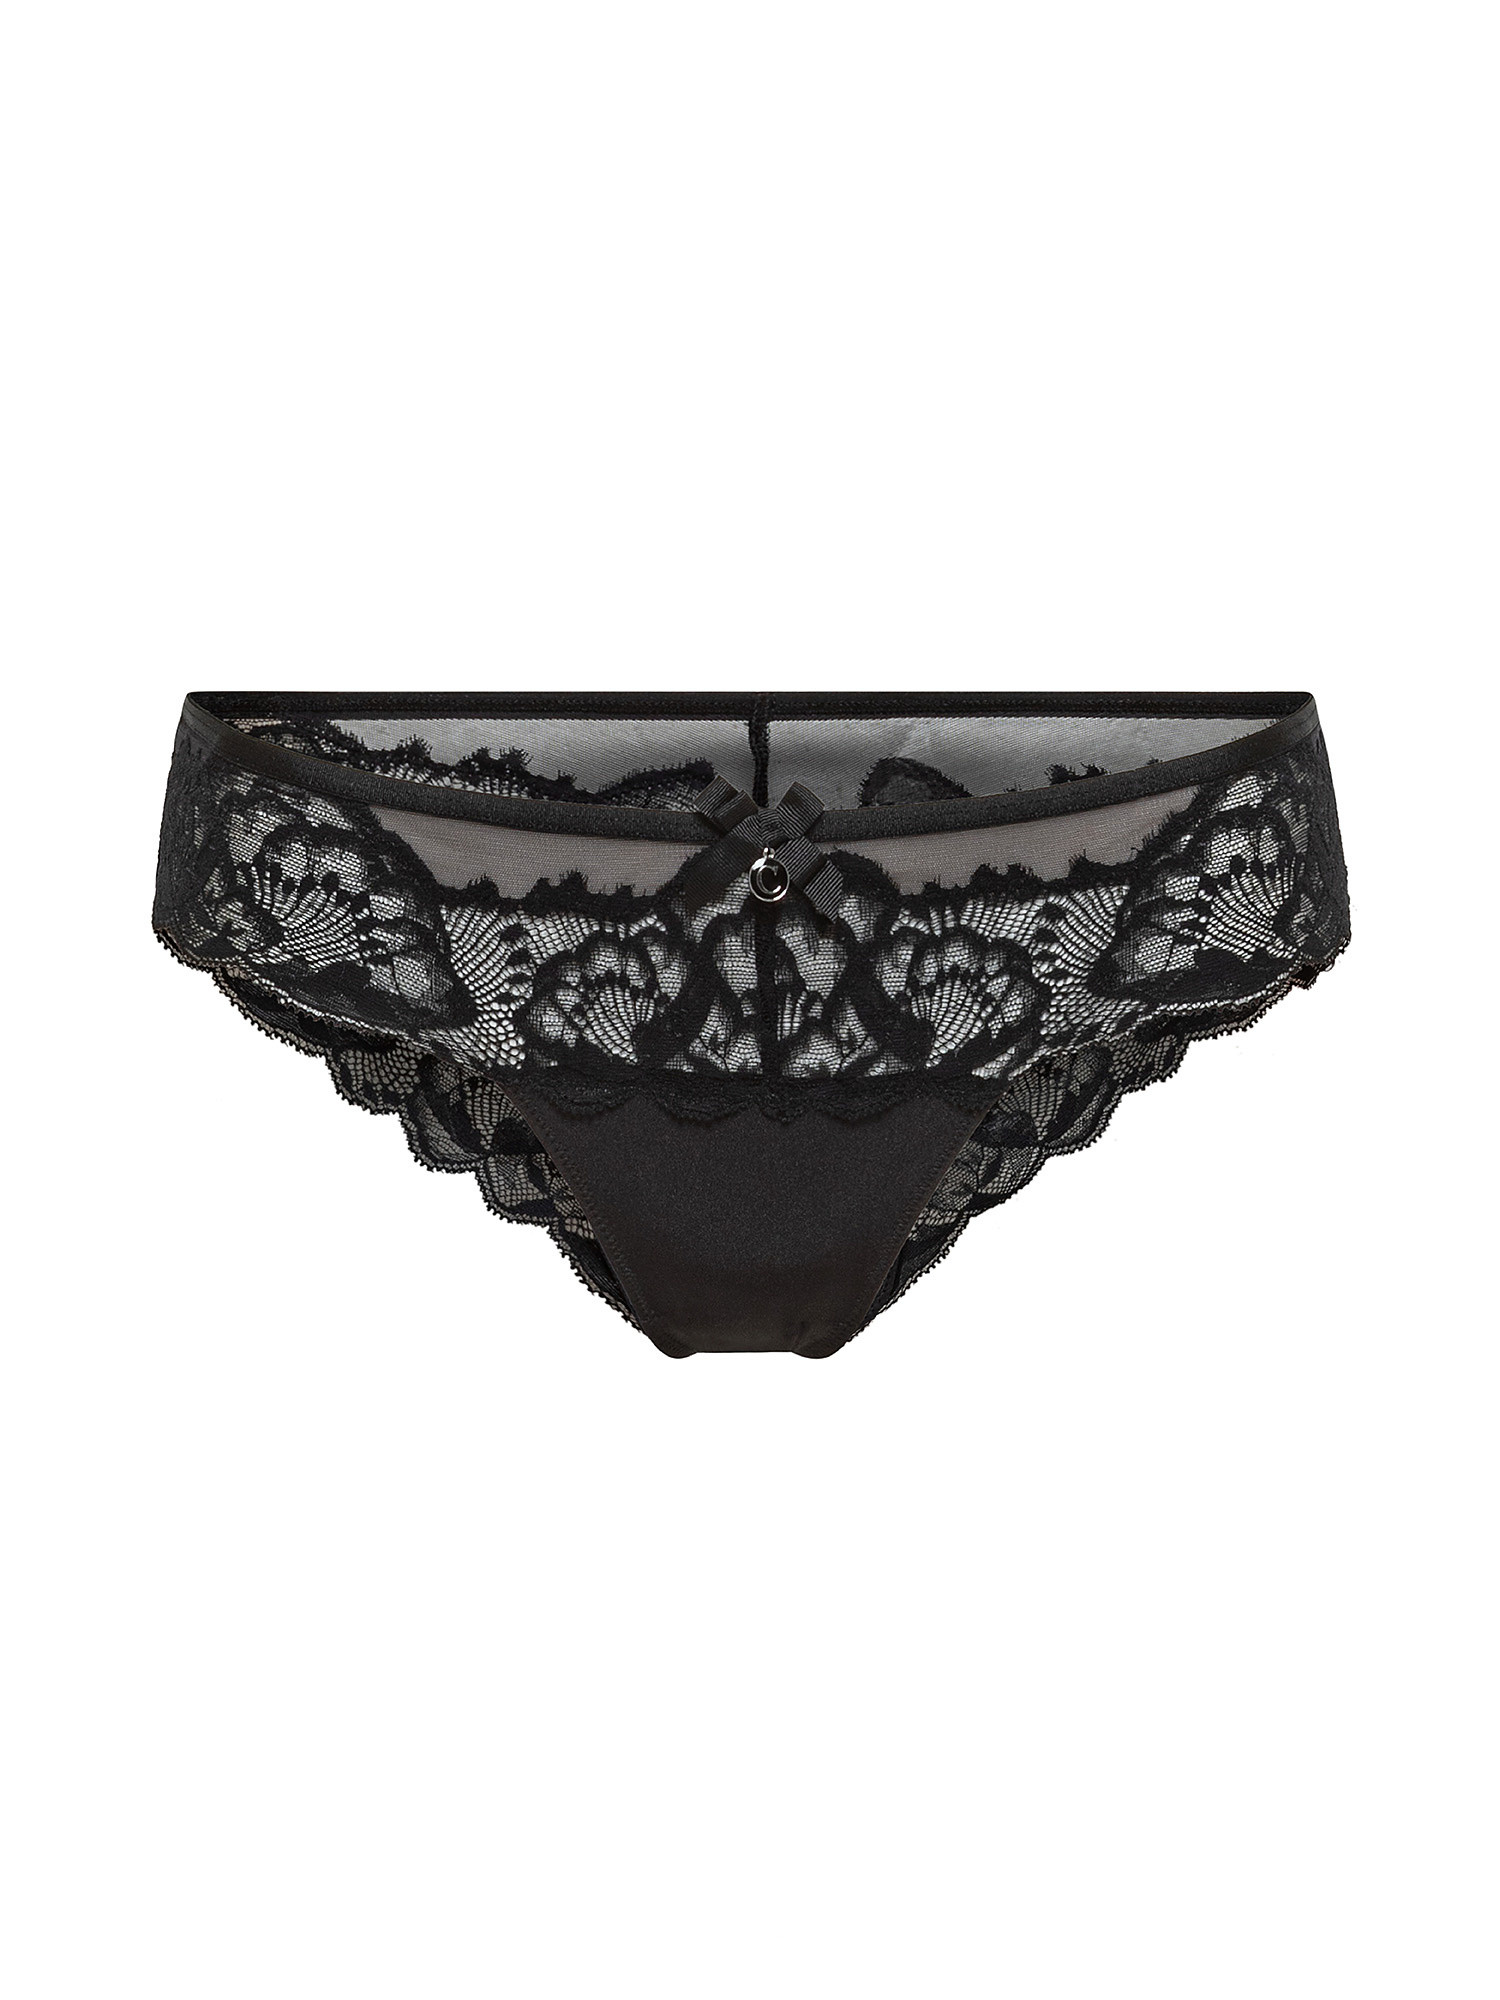 Thong with lace inserts, Black, large image number 0